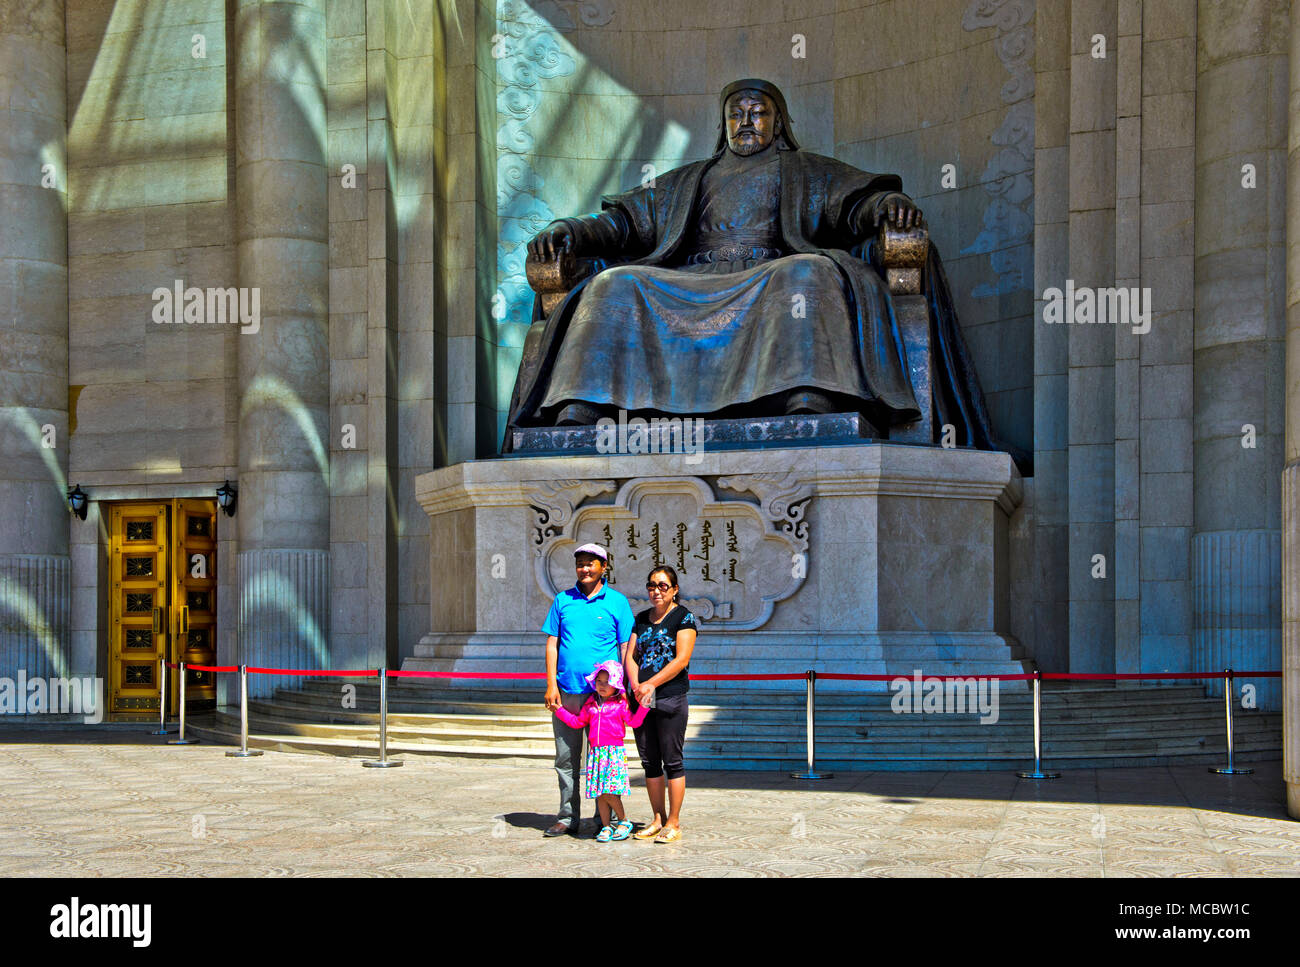 Mongolian couple with child standing for a souvenir photo in front of the Genghis Khan monument at the Parliament Building on Sukhbaatar Square, Ulaan Stock Photo